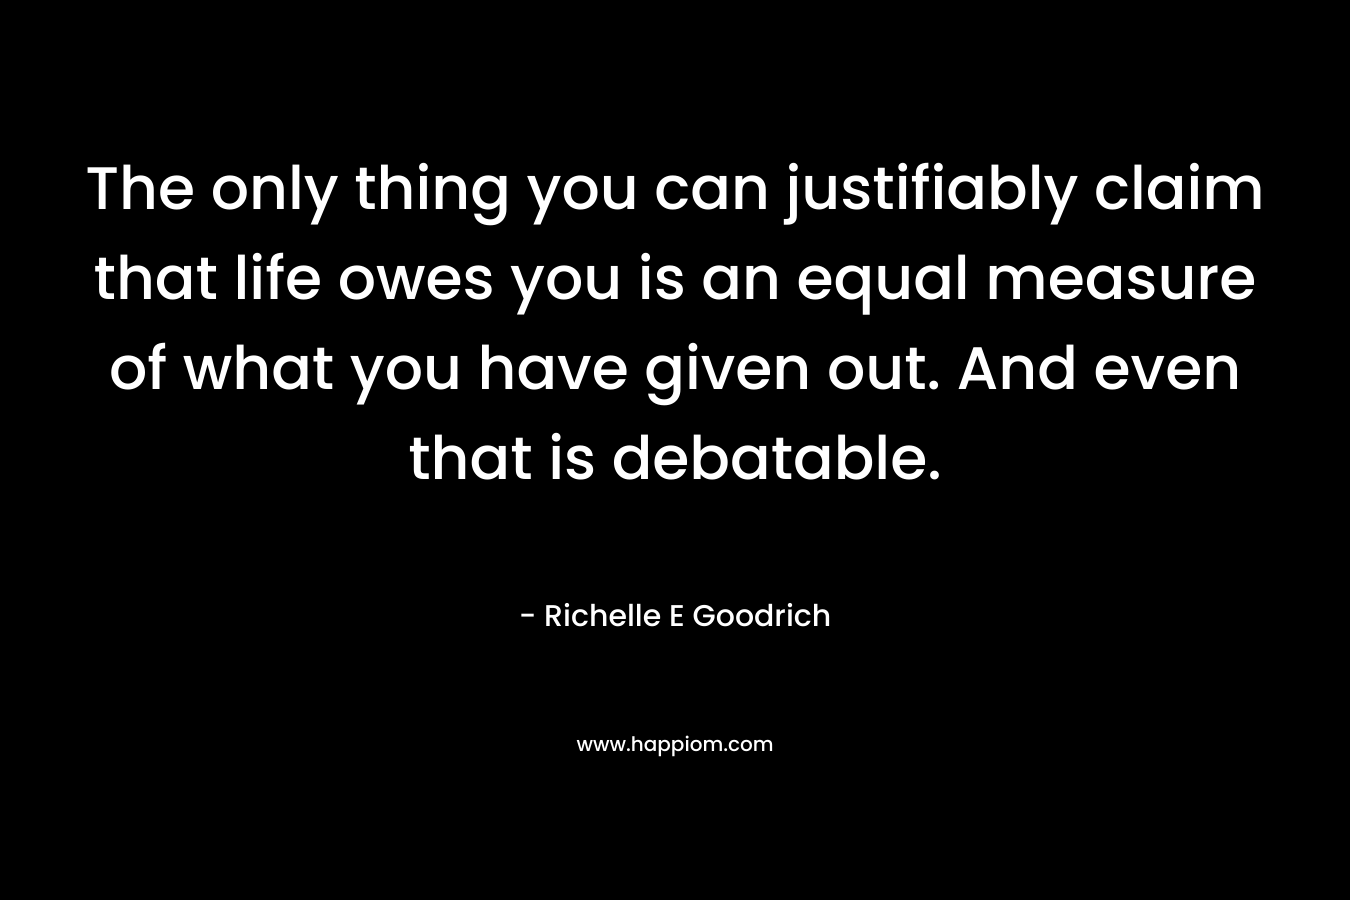 The only thing you can justifiably claim that life owes you is an equal measure of what you have given out. And even that is debatable.